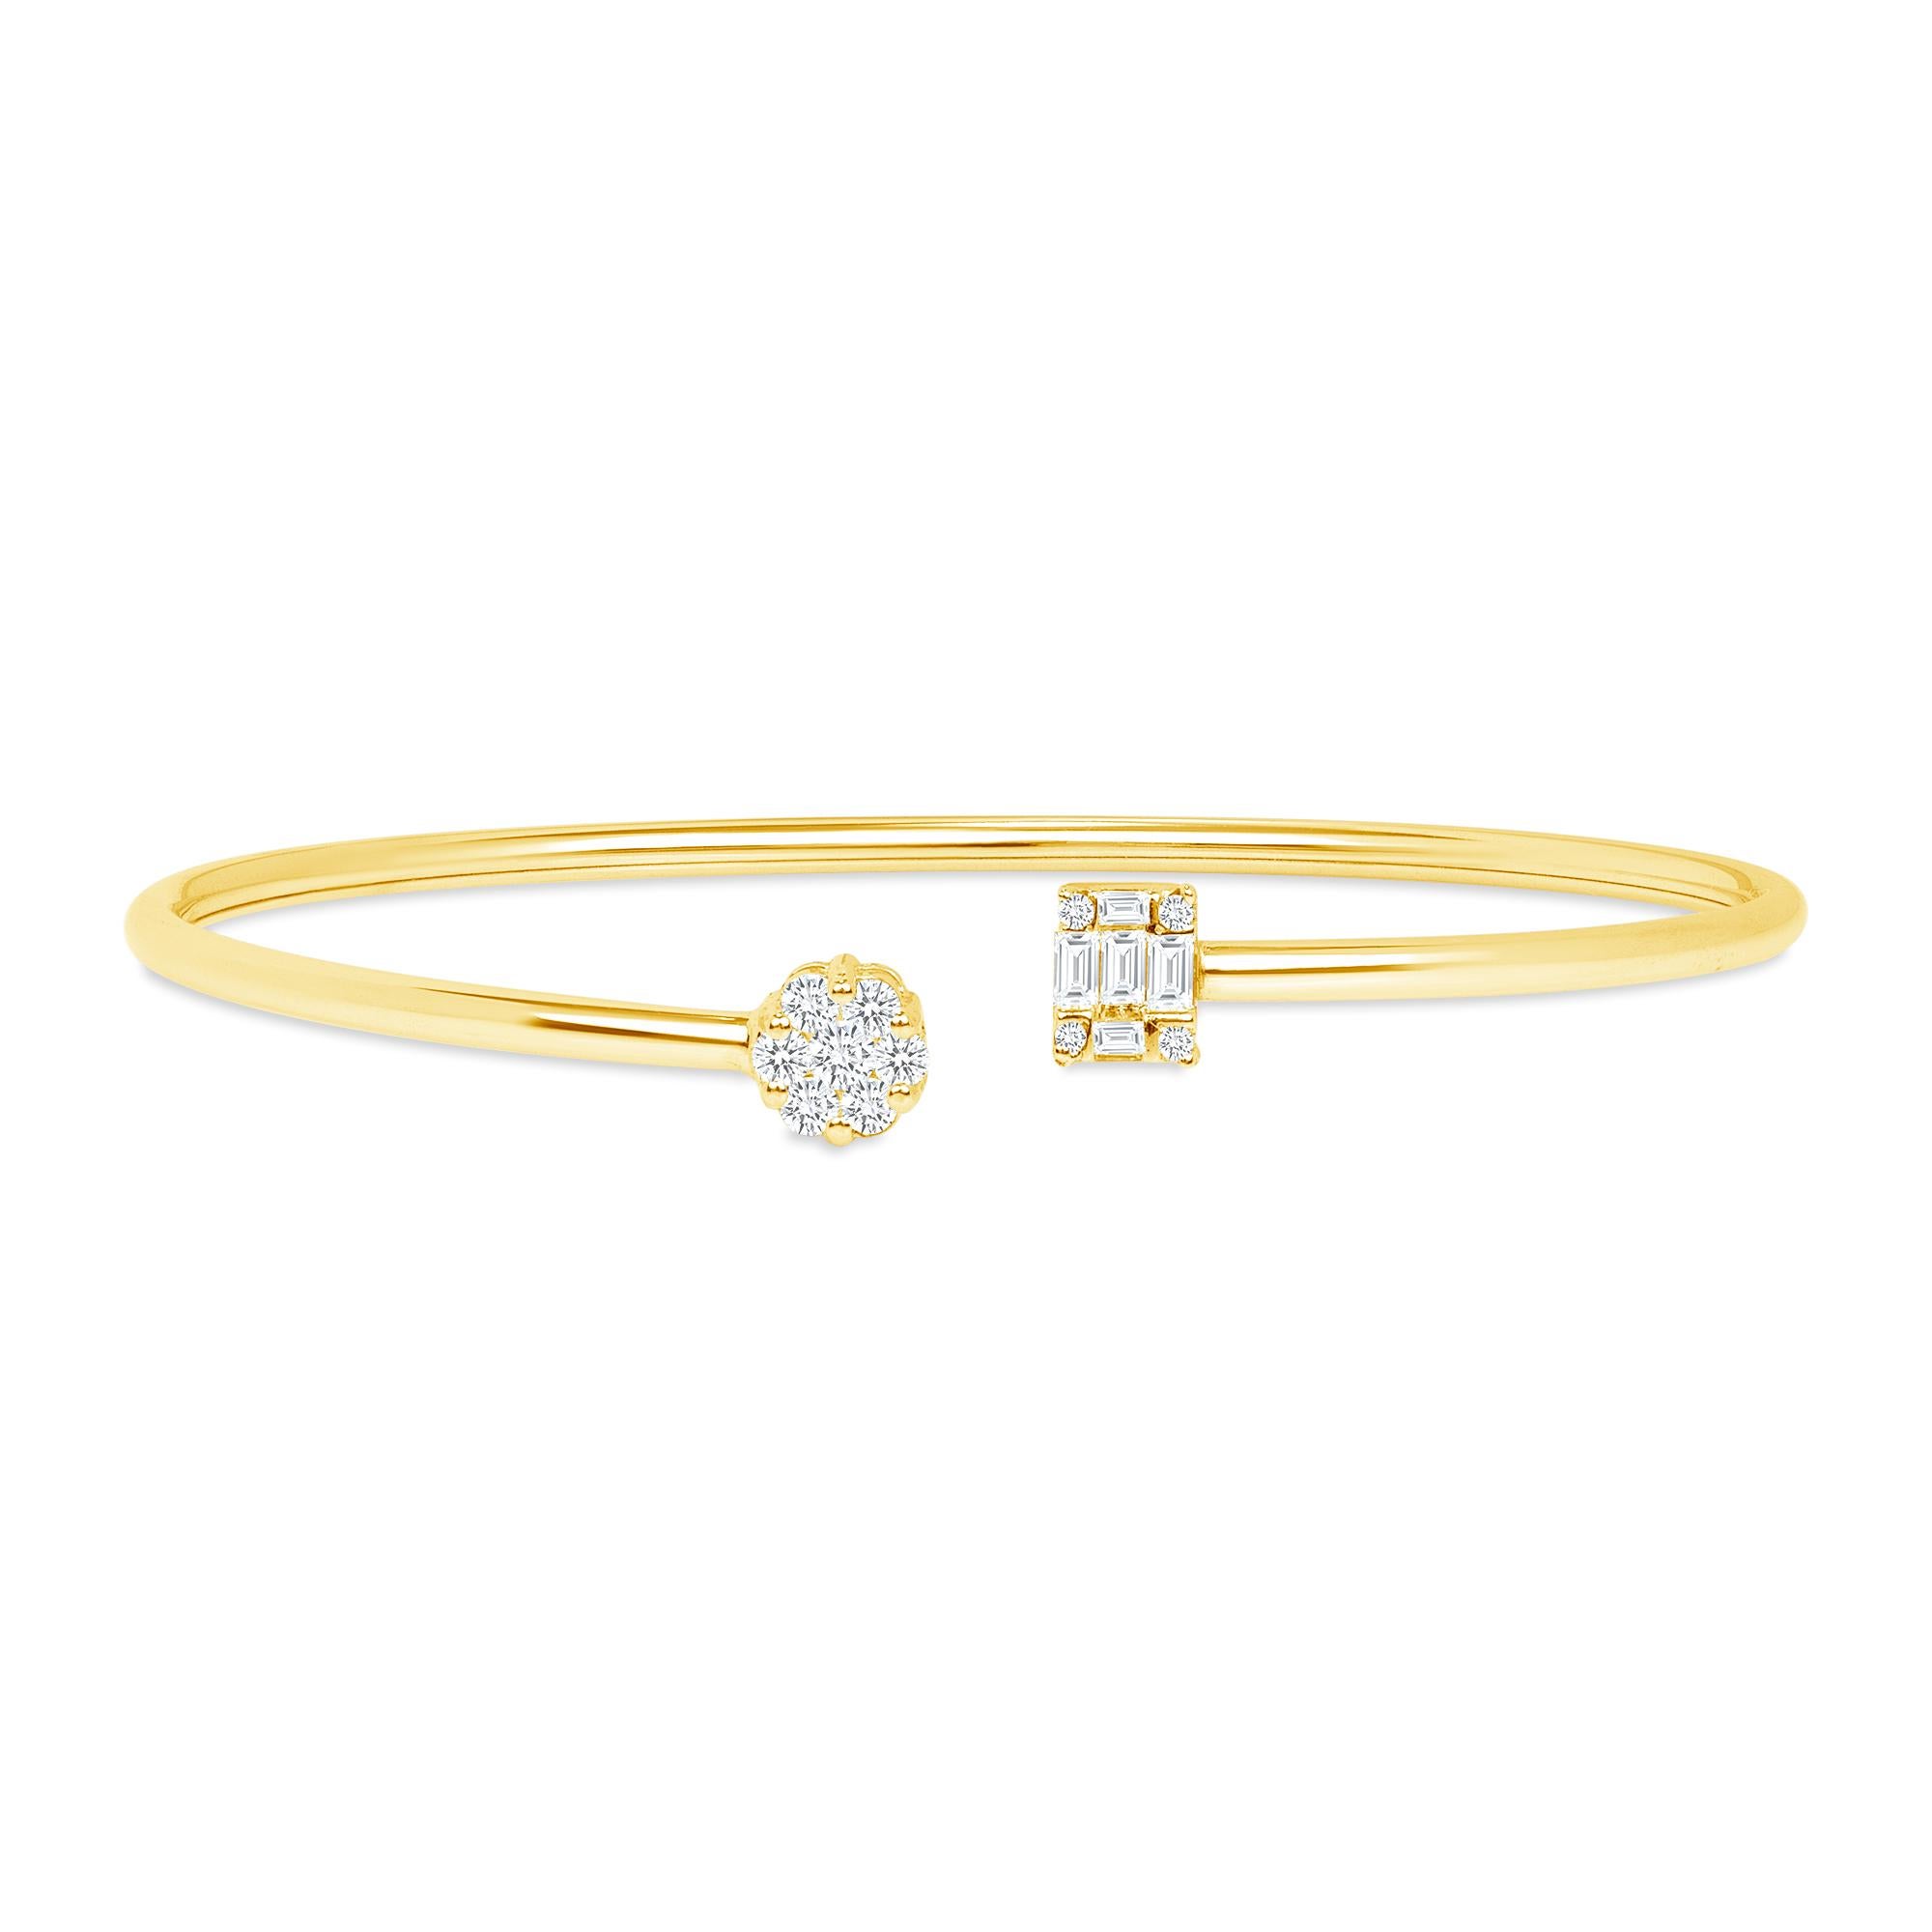 18k Yellow Gold Diamond Cuff Bangle Bracelet, 0.50 ct Diamond Bracelet, Open Cuff Bangle, Illusion Bracelet

Description

This is a beautiful diamond design 18k Gold bangle. encrusted with Round and Baguette Natural Diamonds. The illusion provided